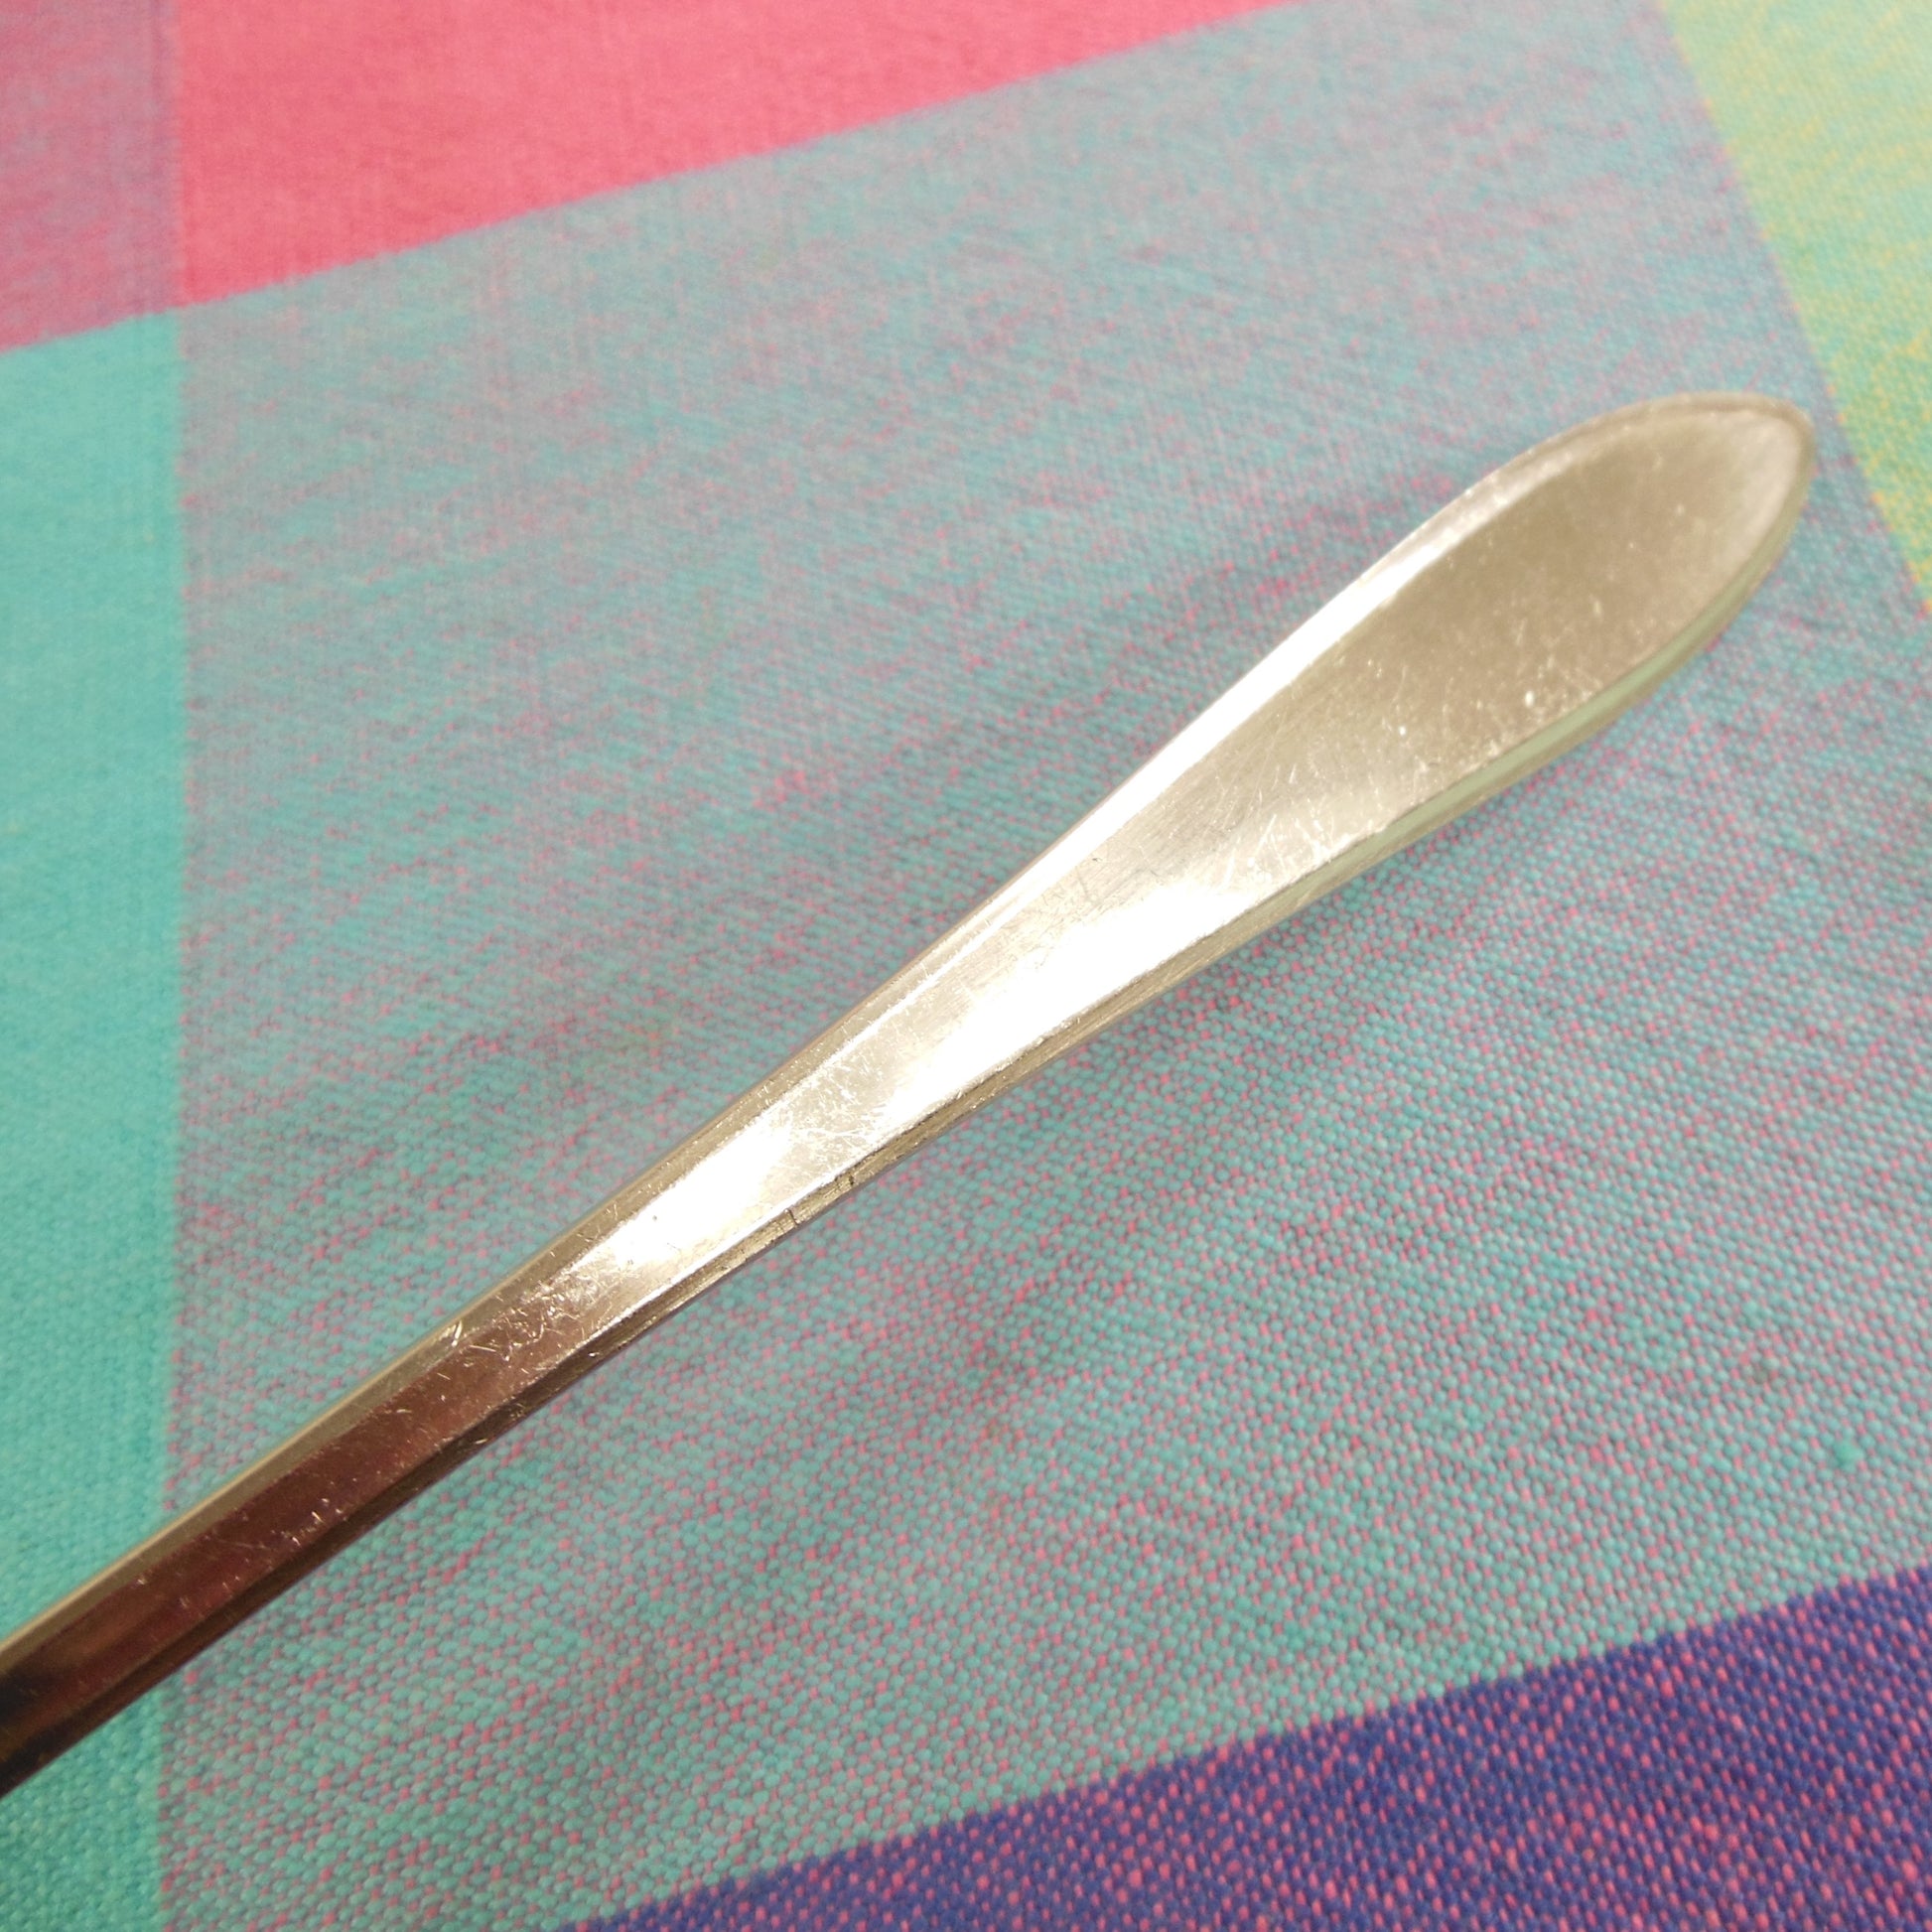 WMF Cromargan Germany Shadowpoint Stainless Gravy Ladle Used